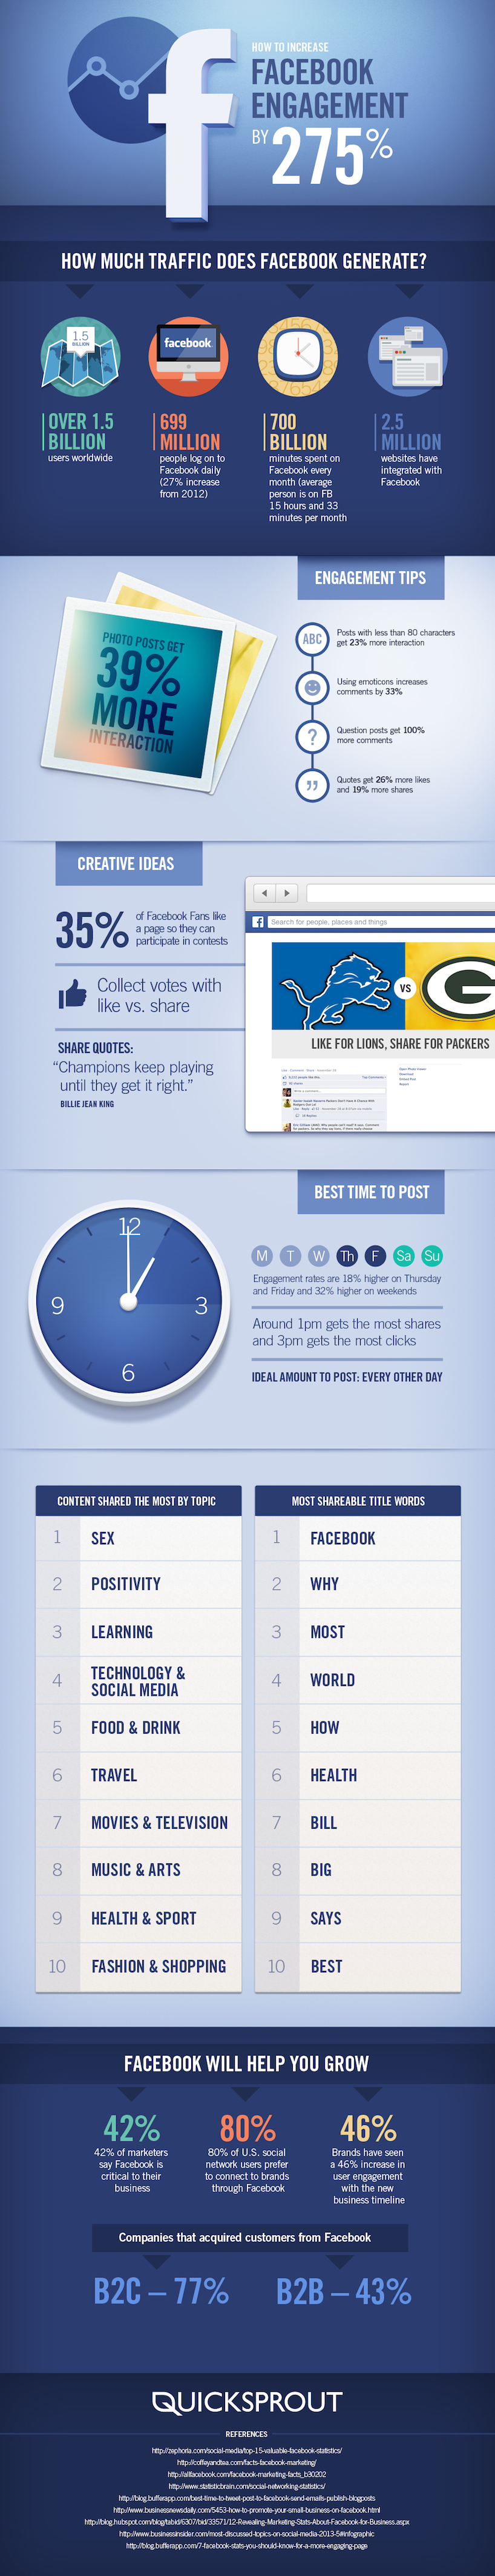 Facebook engagement infographic